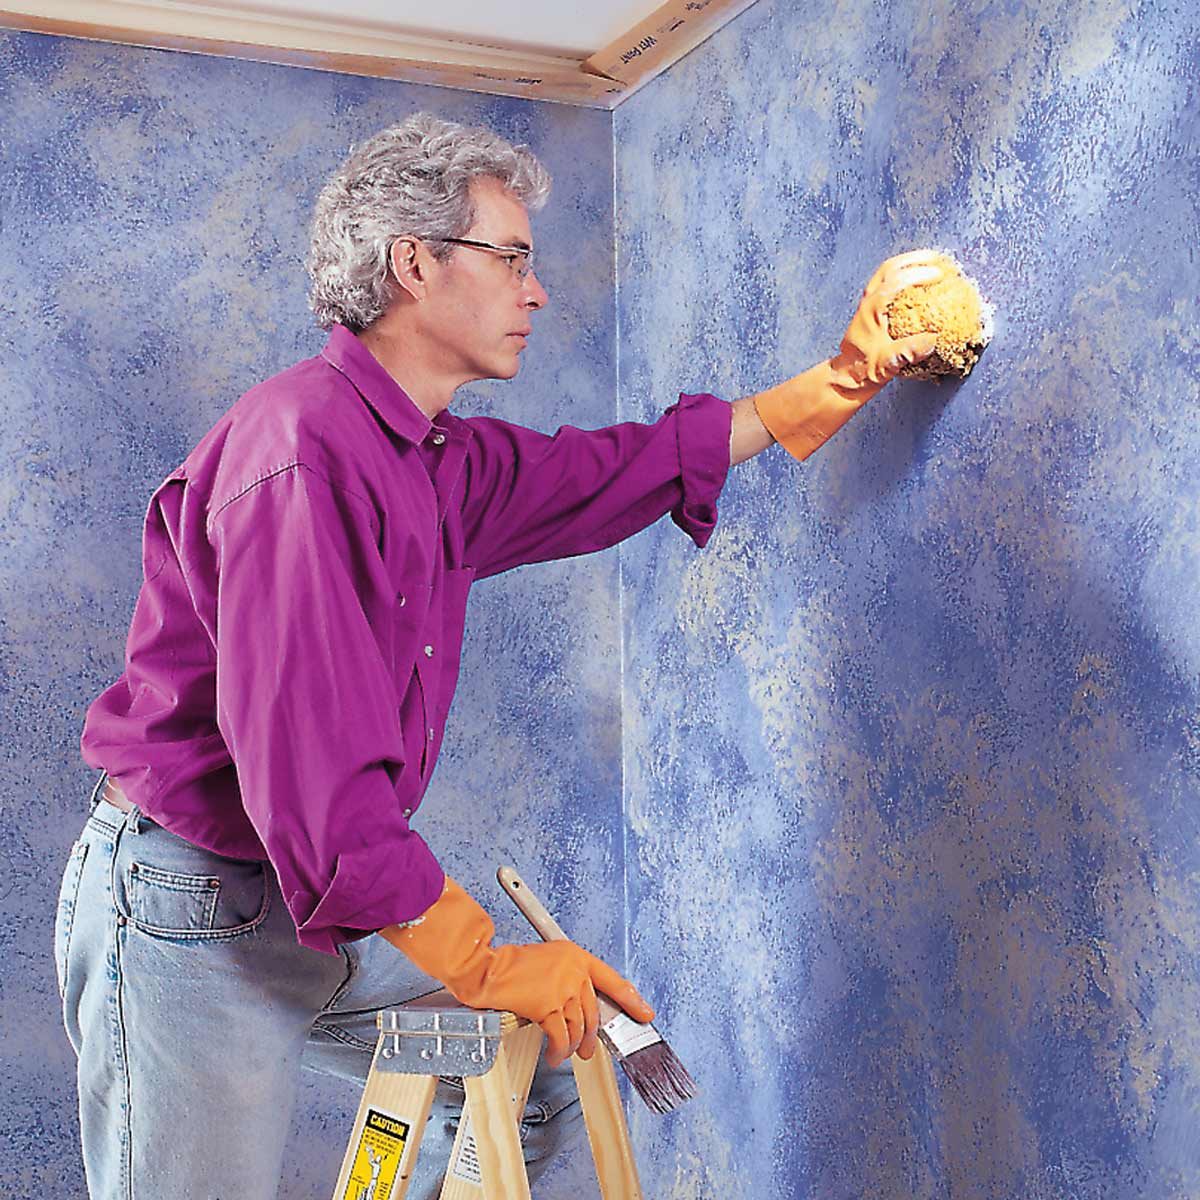 How to Sponge Paint a Wall (DIY)